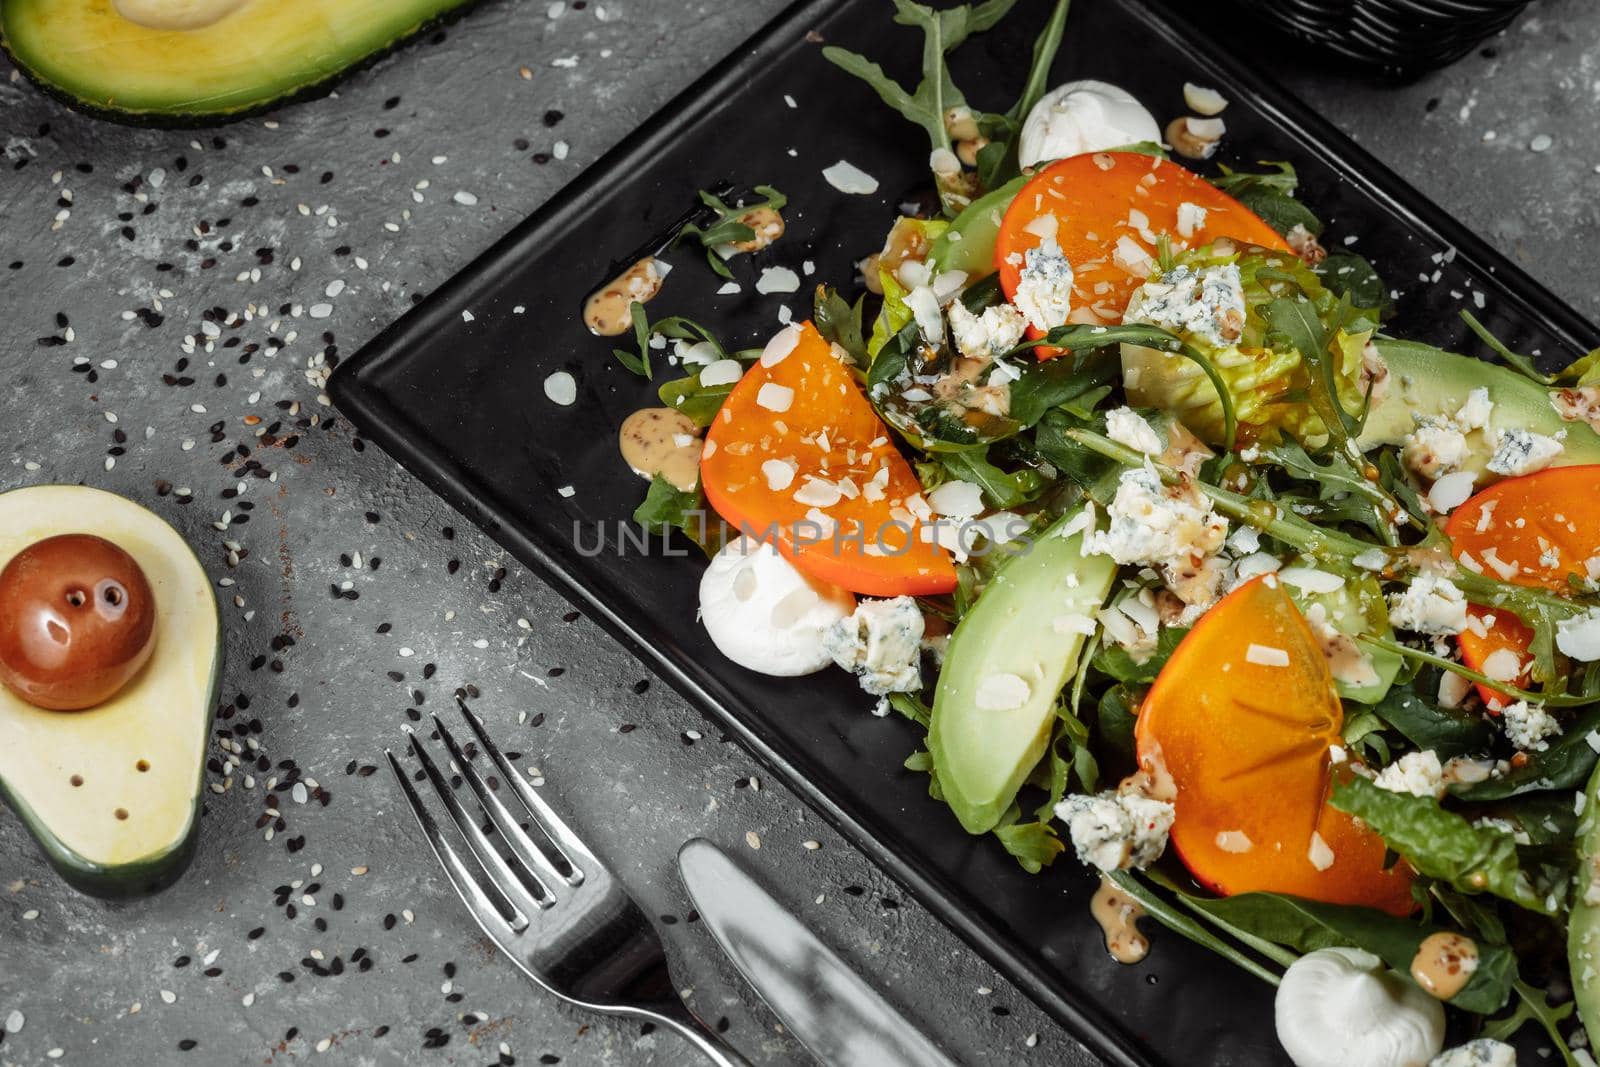 Fresh salad with fruits and greens on dark canvas background. Healthy food.